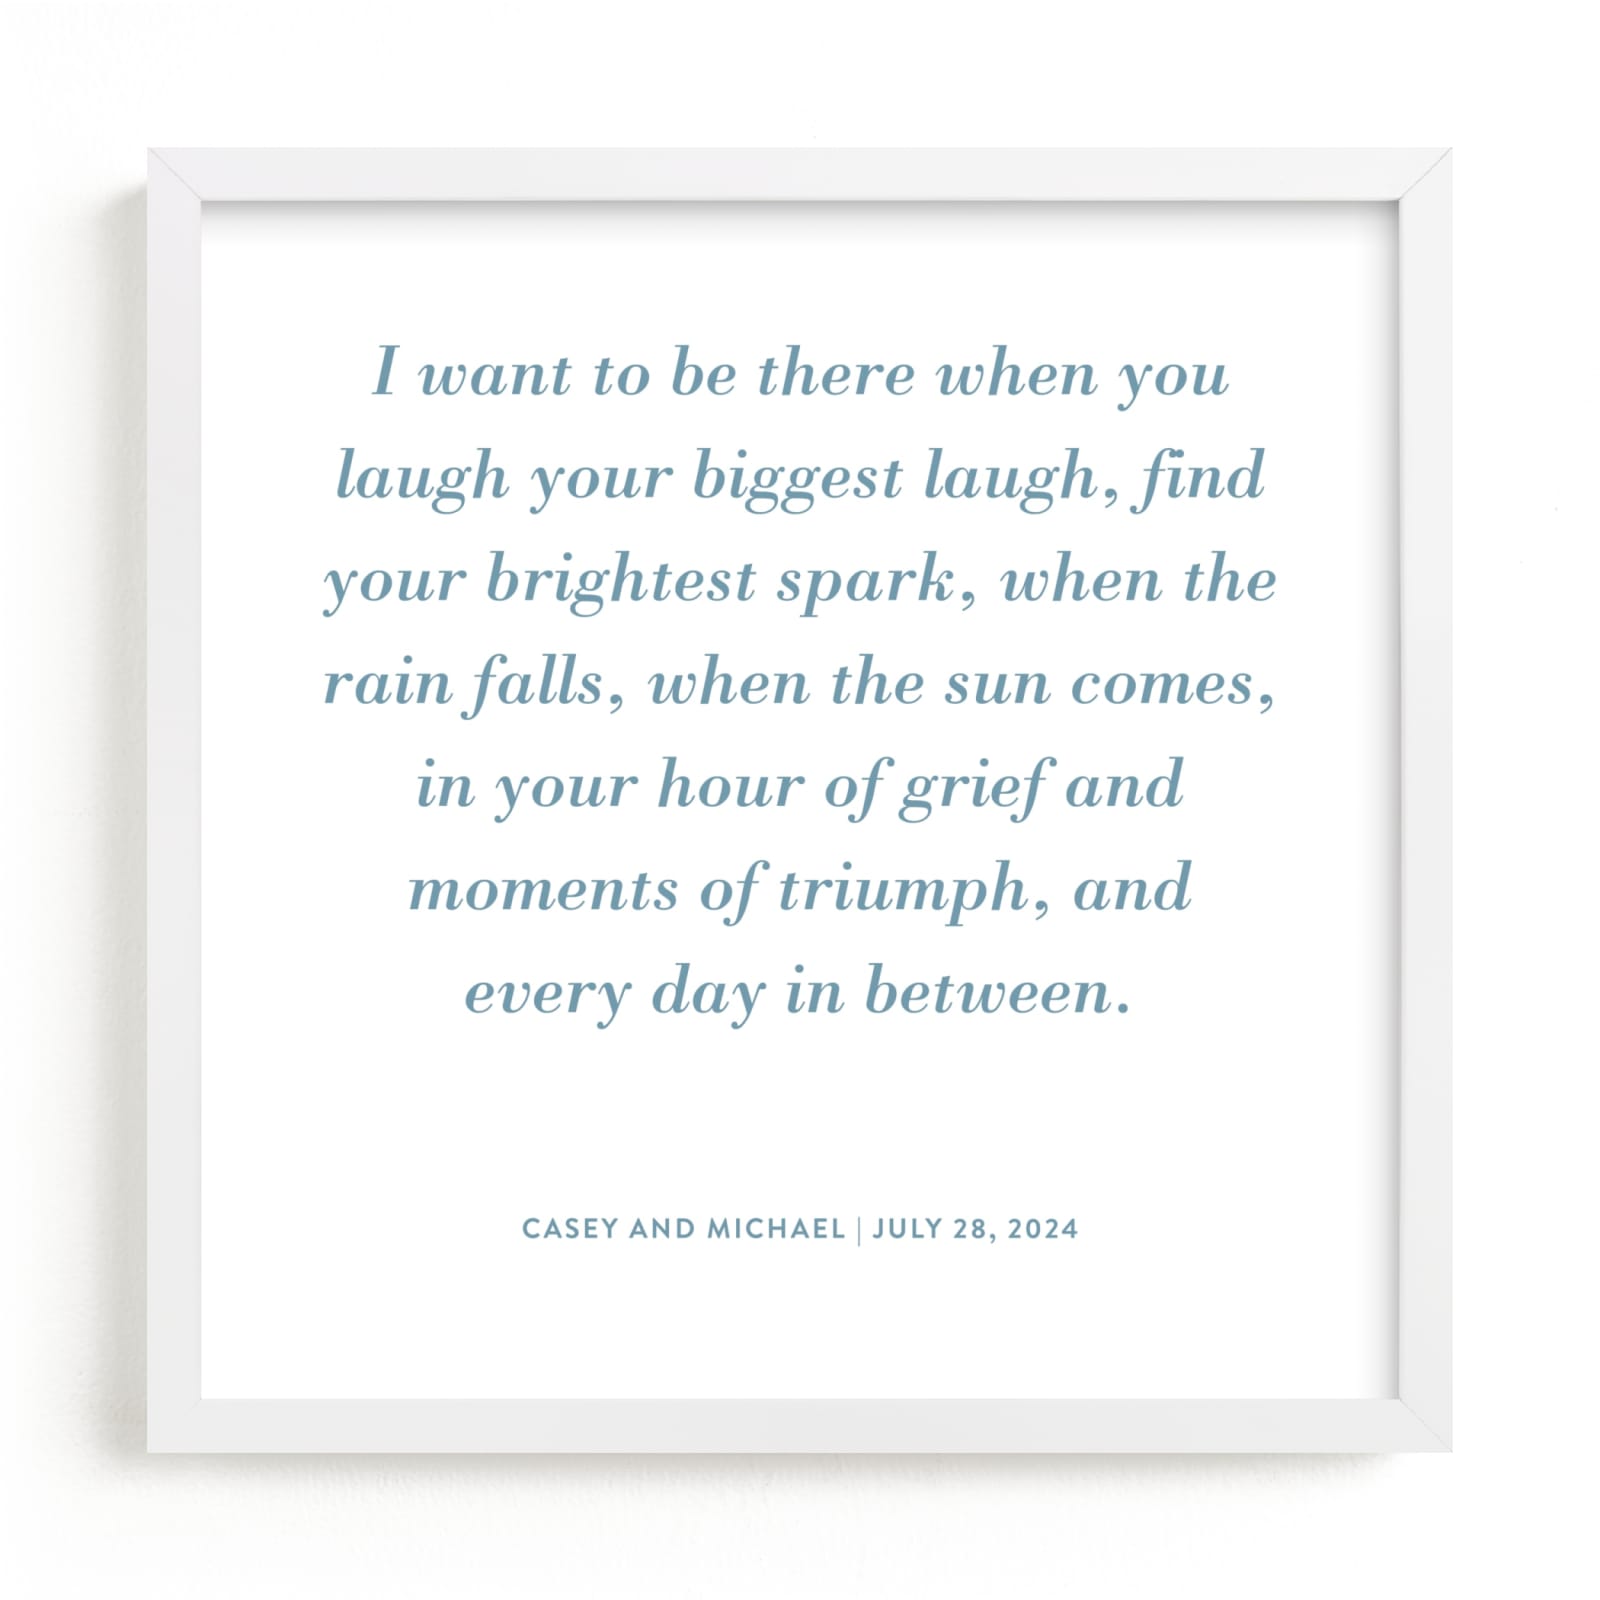 This is a blue photos to art by Minted called Your Vows as a Letterpress Art Print.